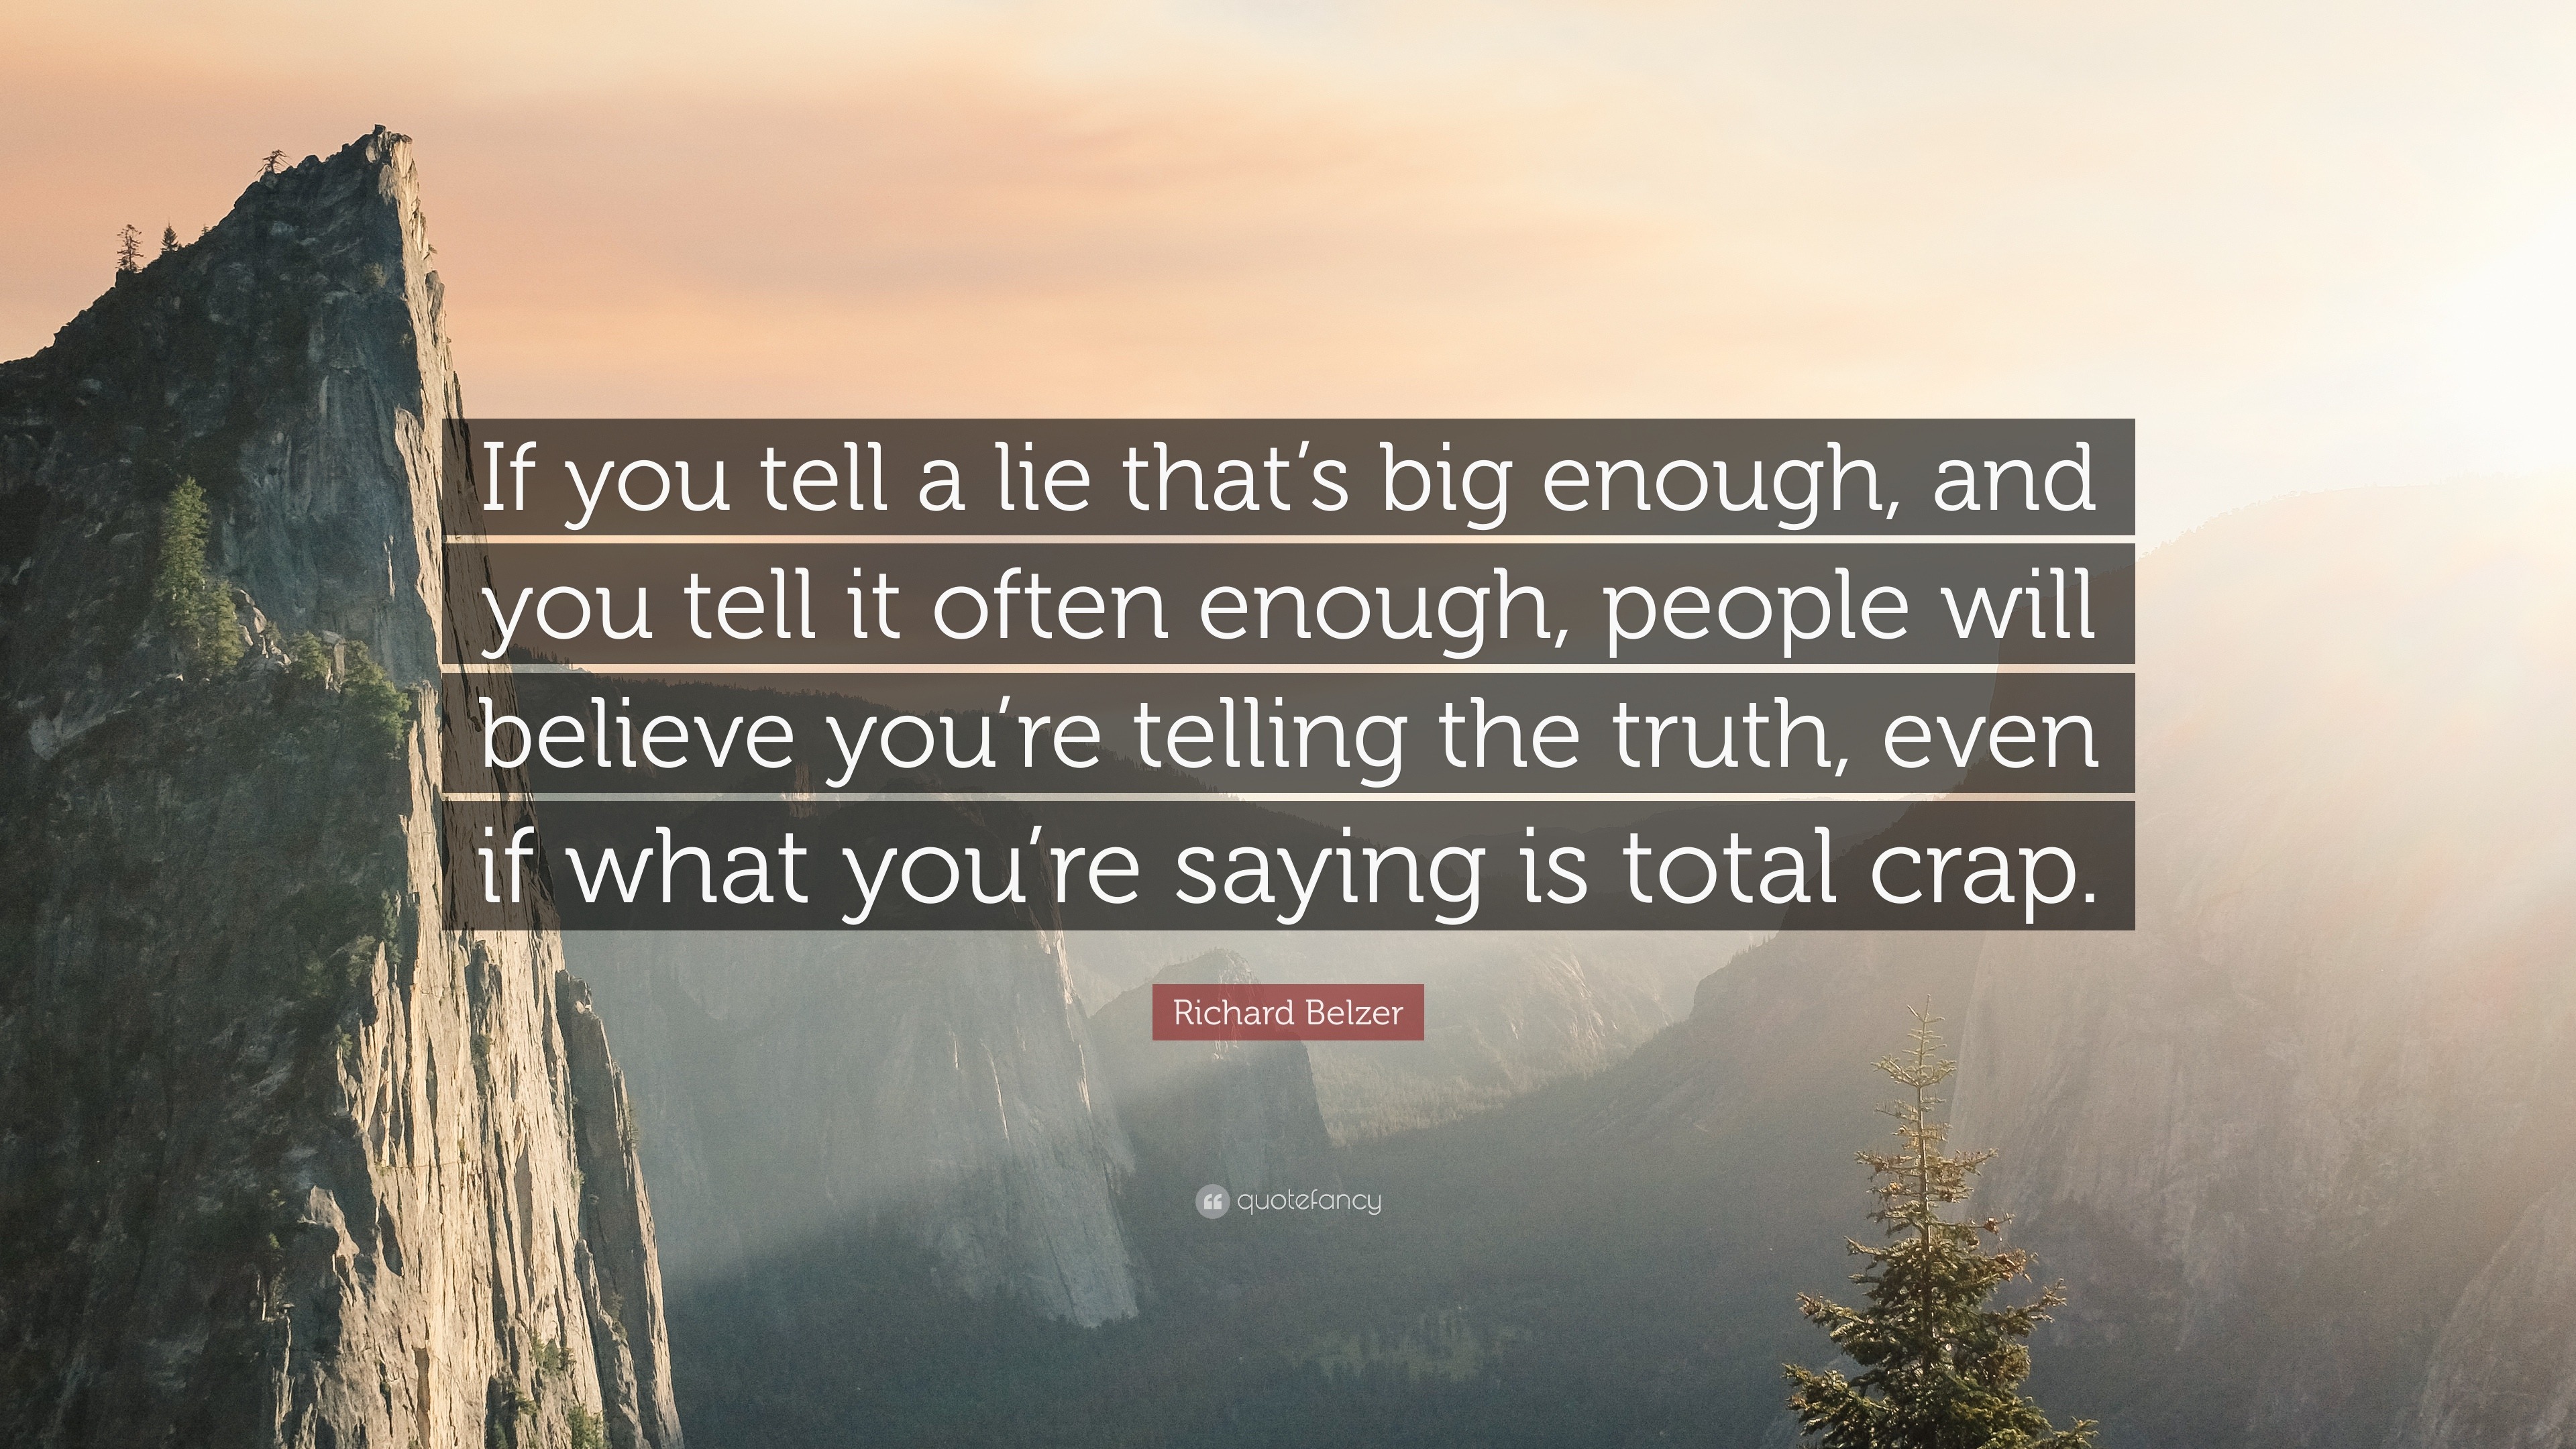 Richard Belzer Quote: “If you tell a lie that's big enough, and you tell it  often enough, people will believe you're telling the truth, even if”